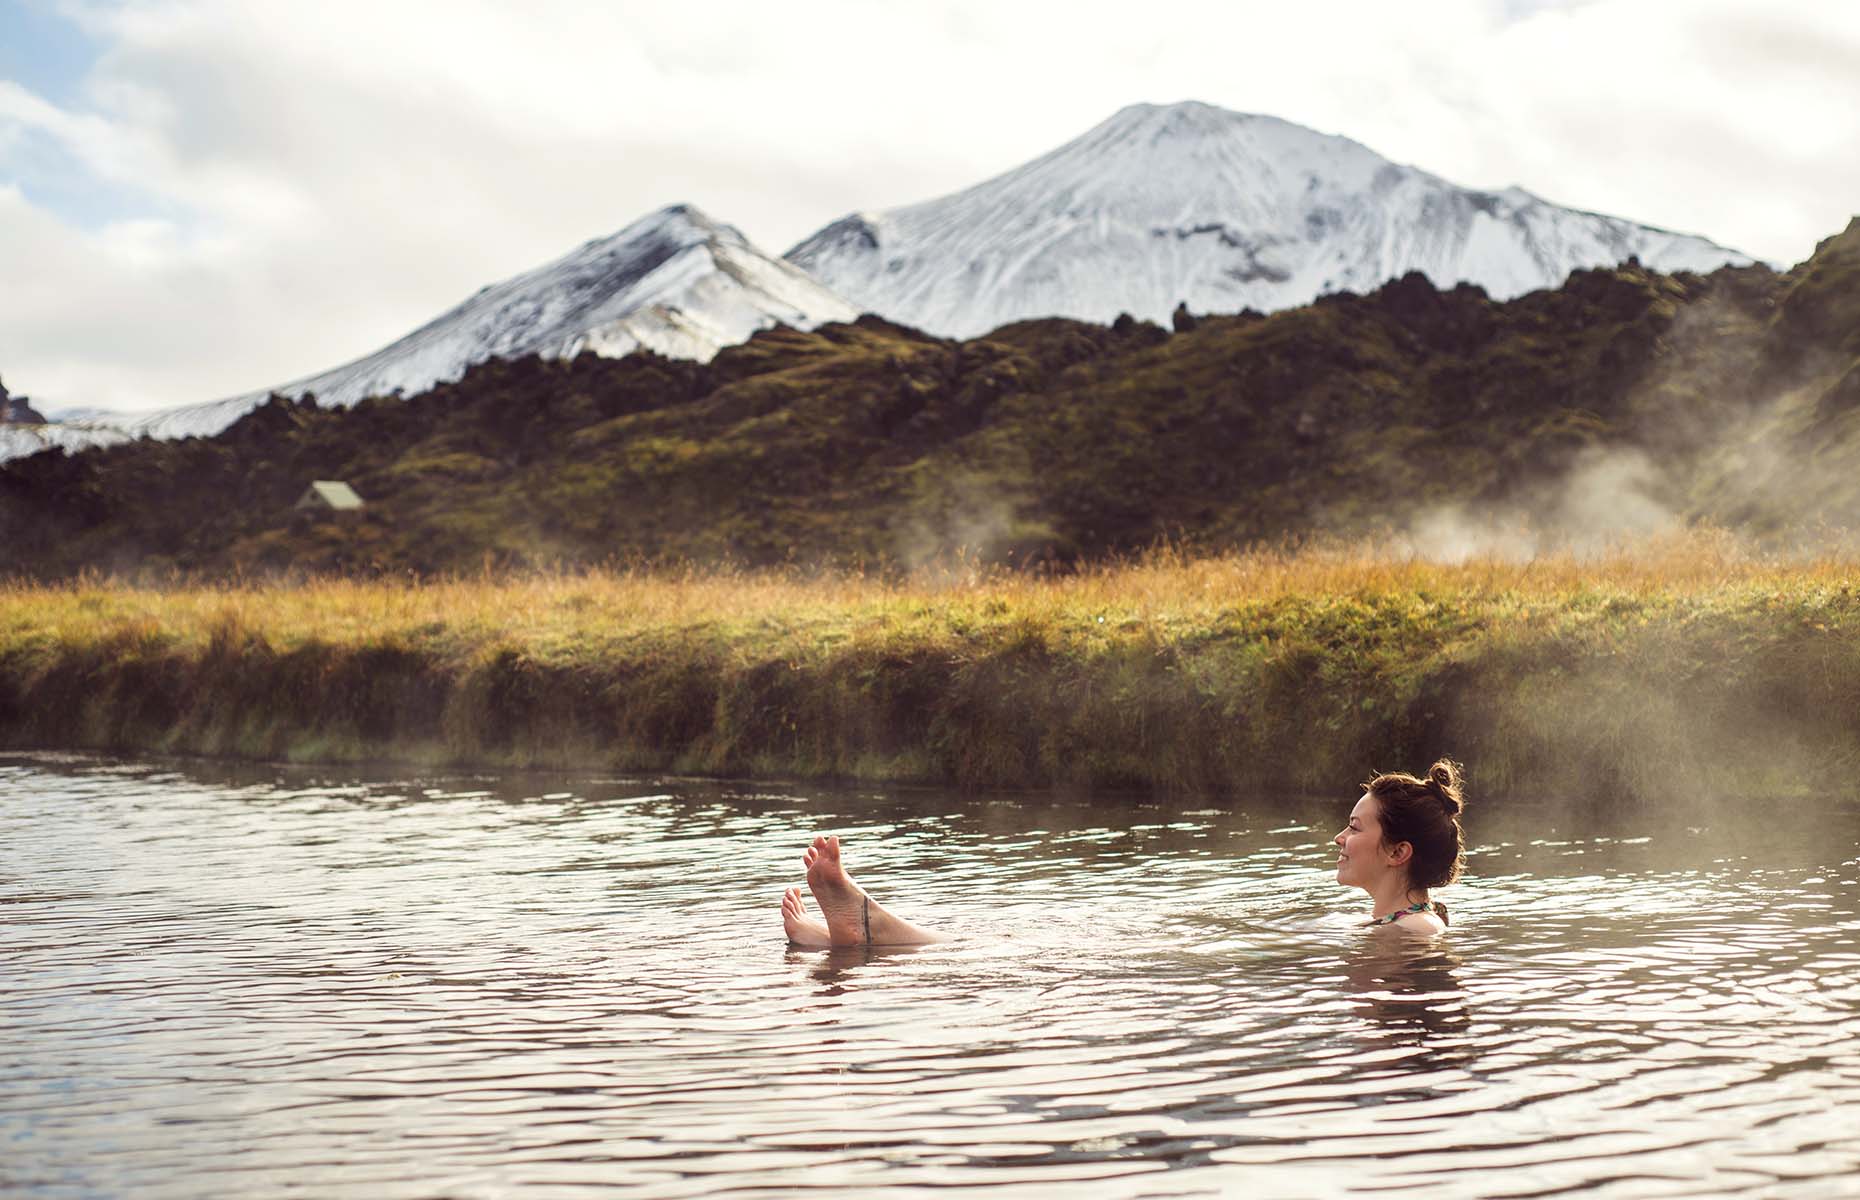 Find a natural hot spring and bathe in it (Image: Gorodisskij/Shutterstock)